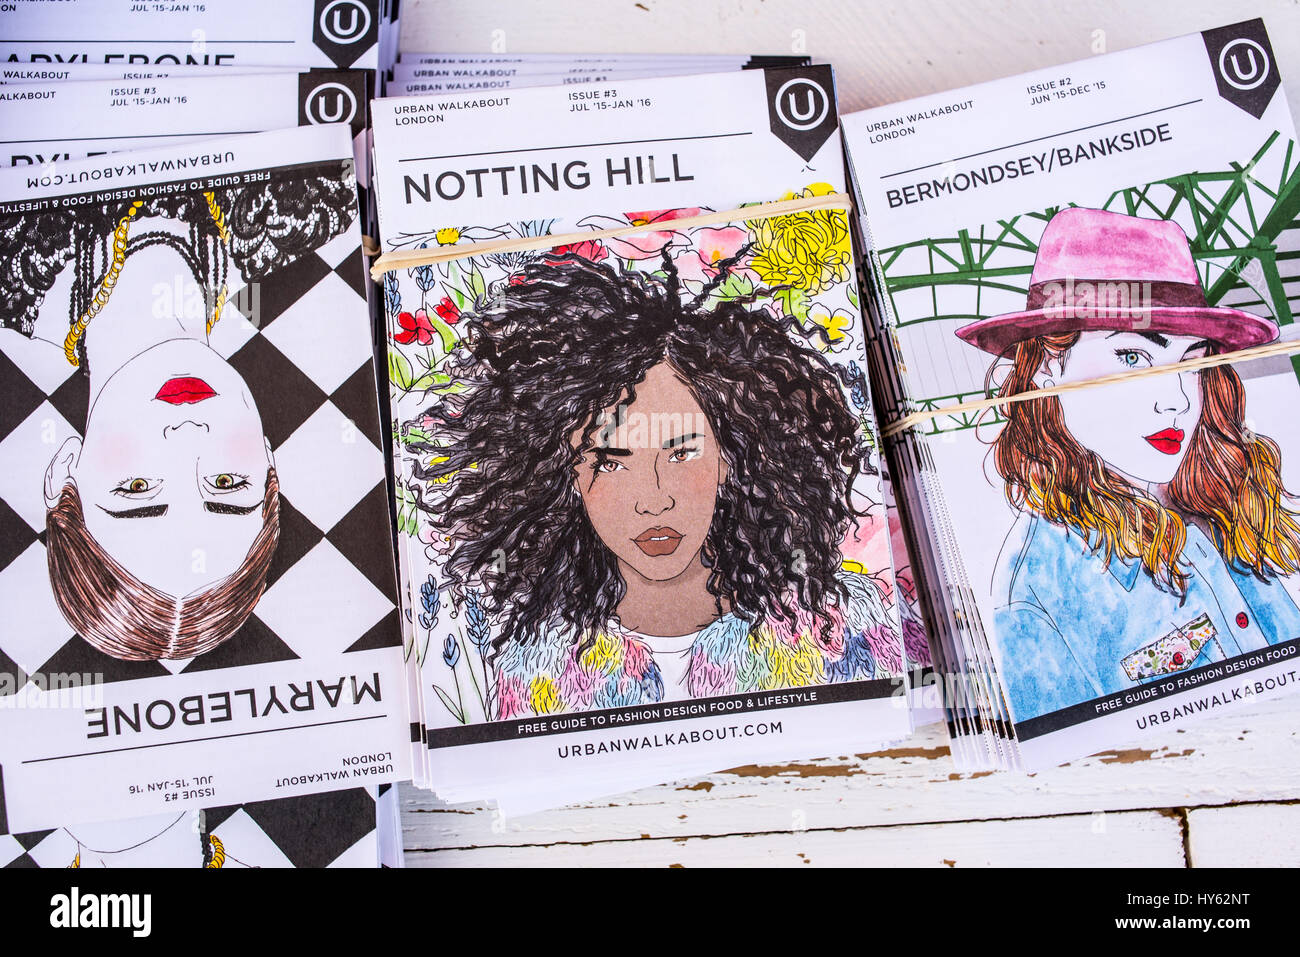 London, UK - 13 March 2016: Free paper guides of Notting hill, Bermonsdey and Marleybone showcasing London fashion, design food and lifestyle with por Stock Photo